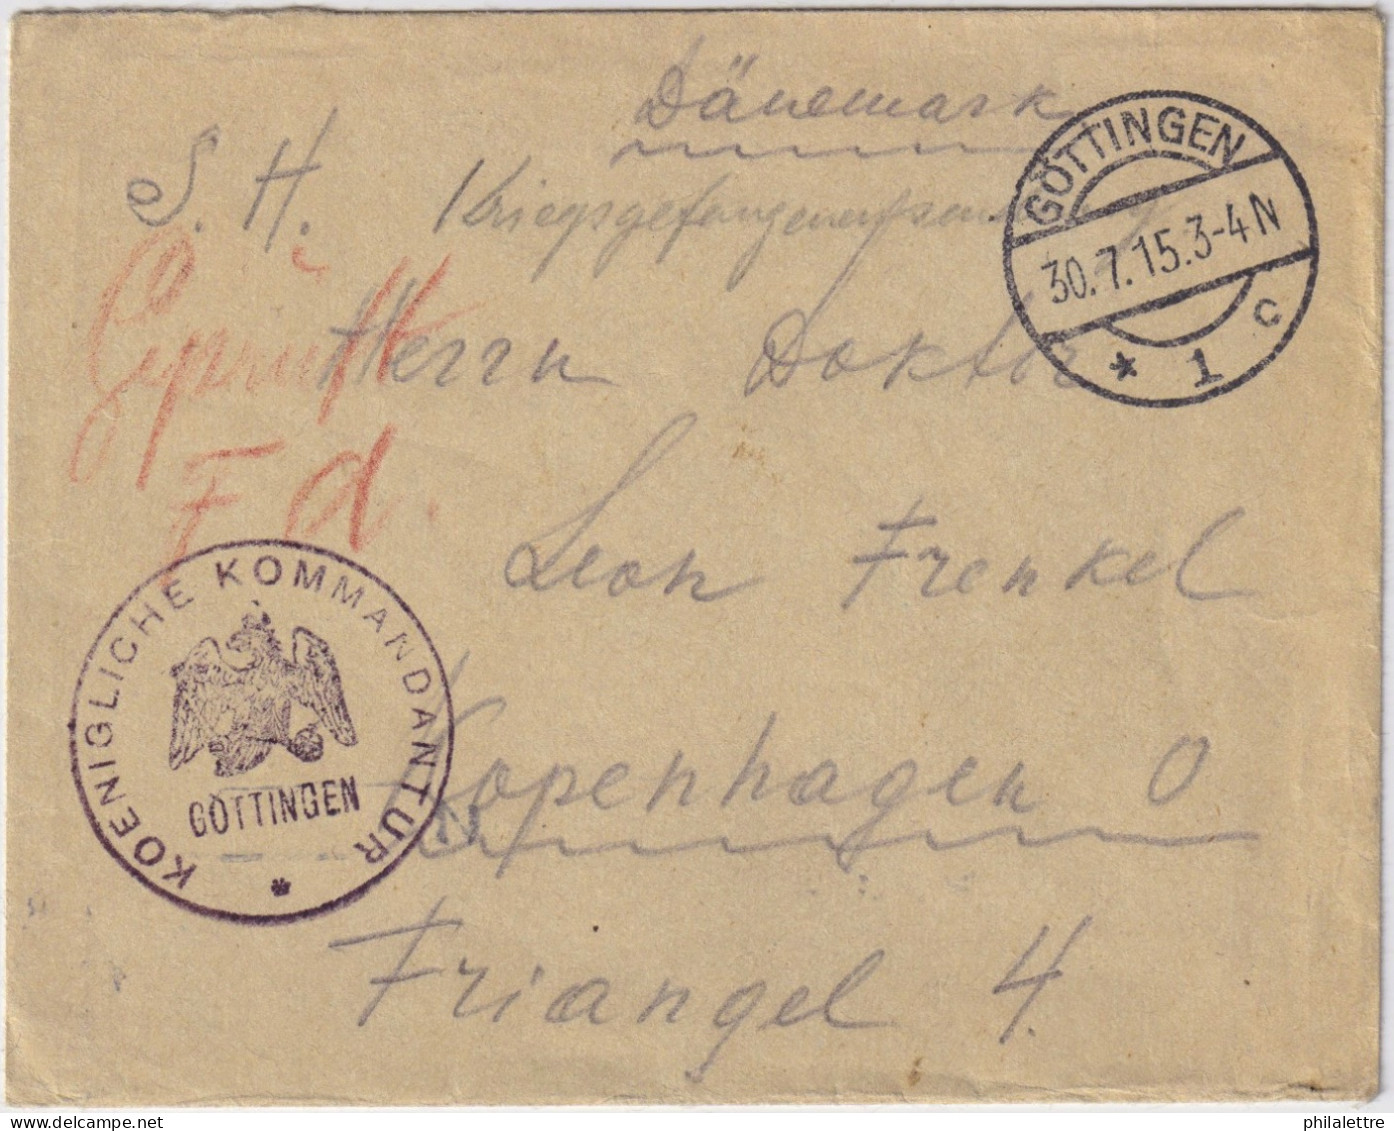 ALLEMAGNE / GERMANY - 1915 POW Cover From An NC Officer In GÖTTINGEN GFLager Addressed To COPENHAGEN, Denmark - Covers & Documents